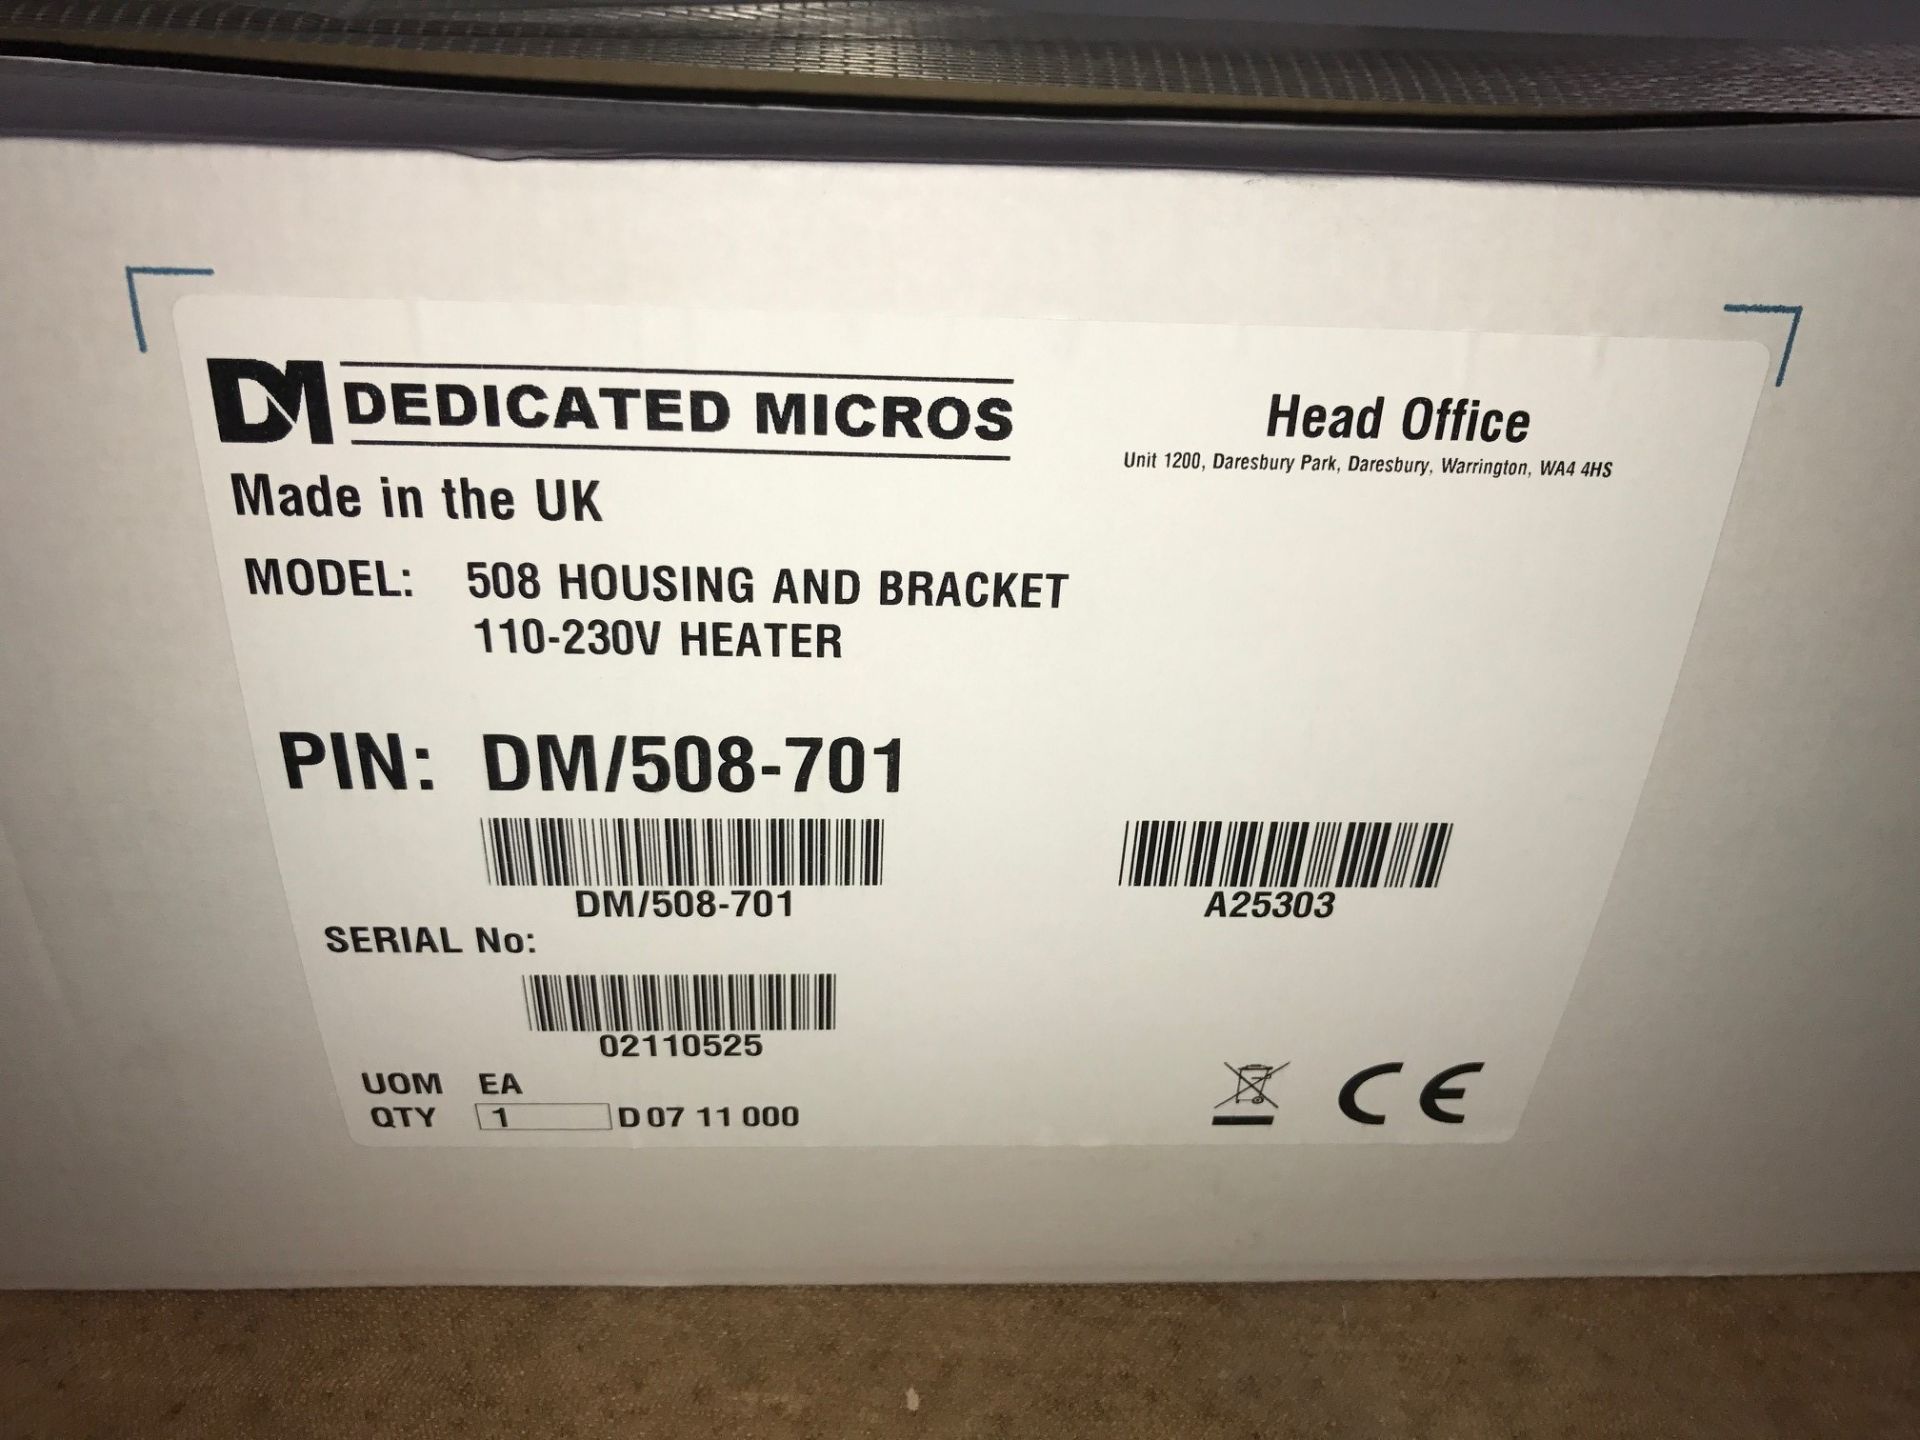 1 x Dedicated Micros DM/508-701 Housing and Bracket 110-230V Heater (Brand New & Boxed) - Image 4 of 5